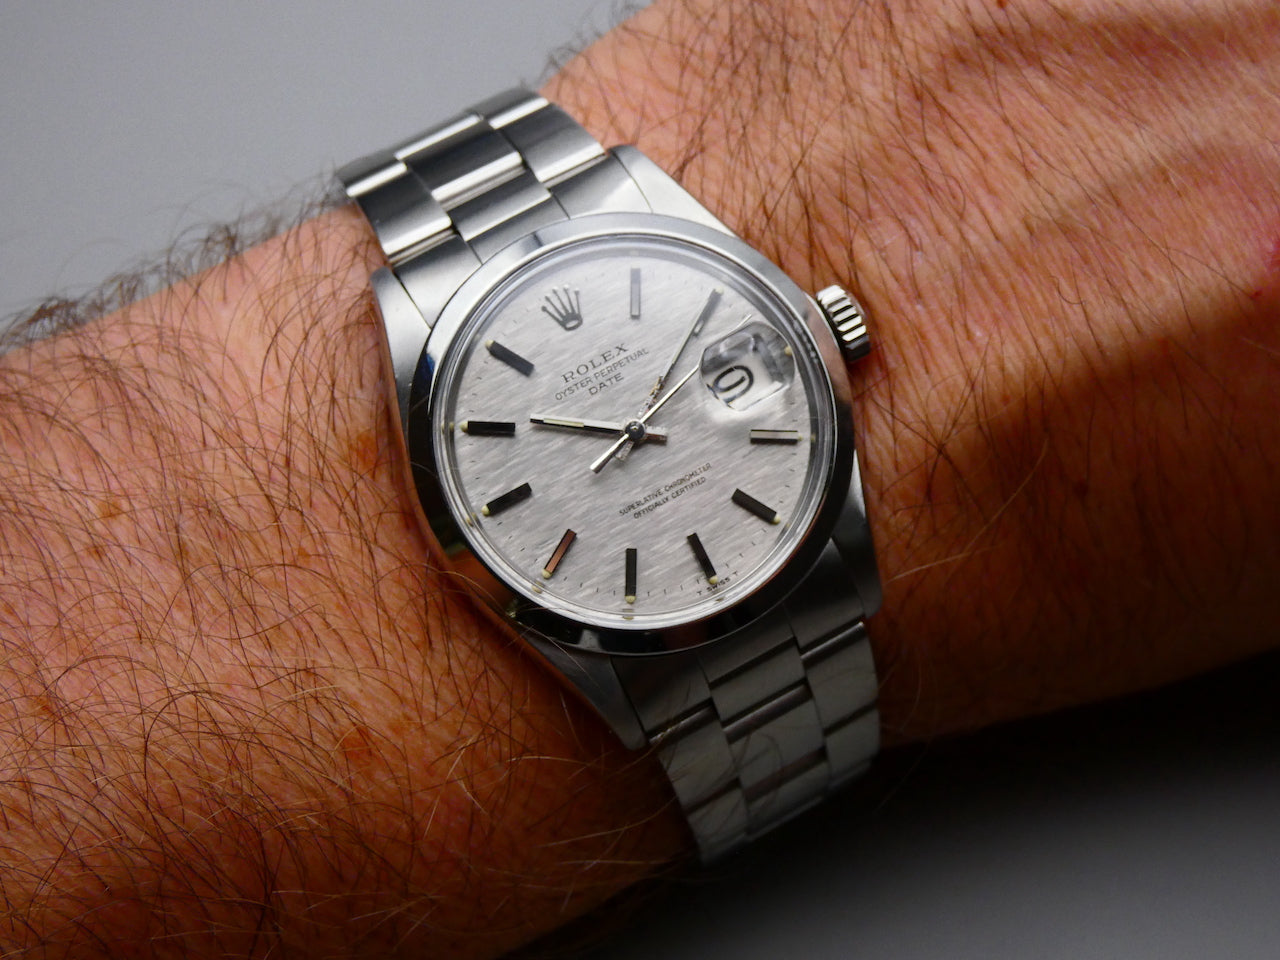 SOLD Rolex Rare Oyster Perpetual Date Shantung / Mosaic dial / 1970